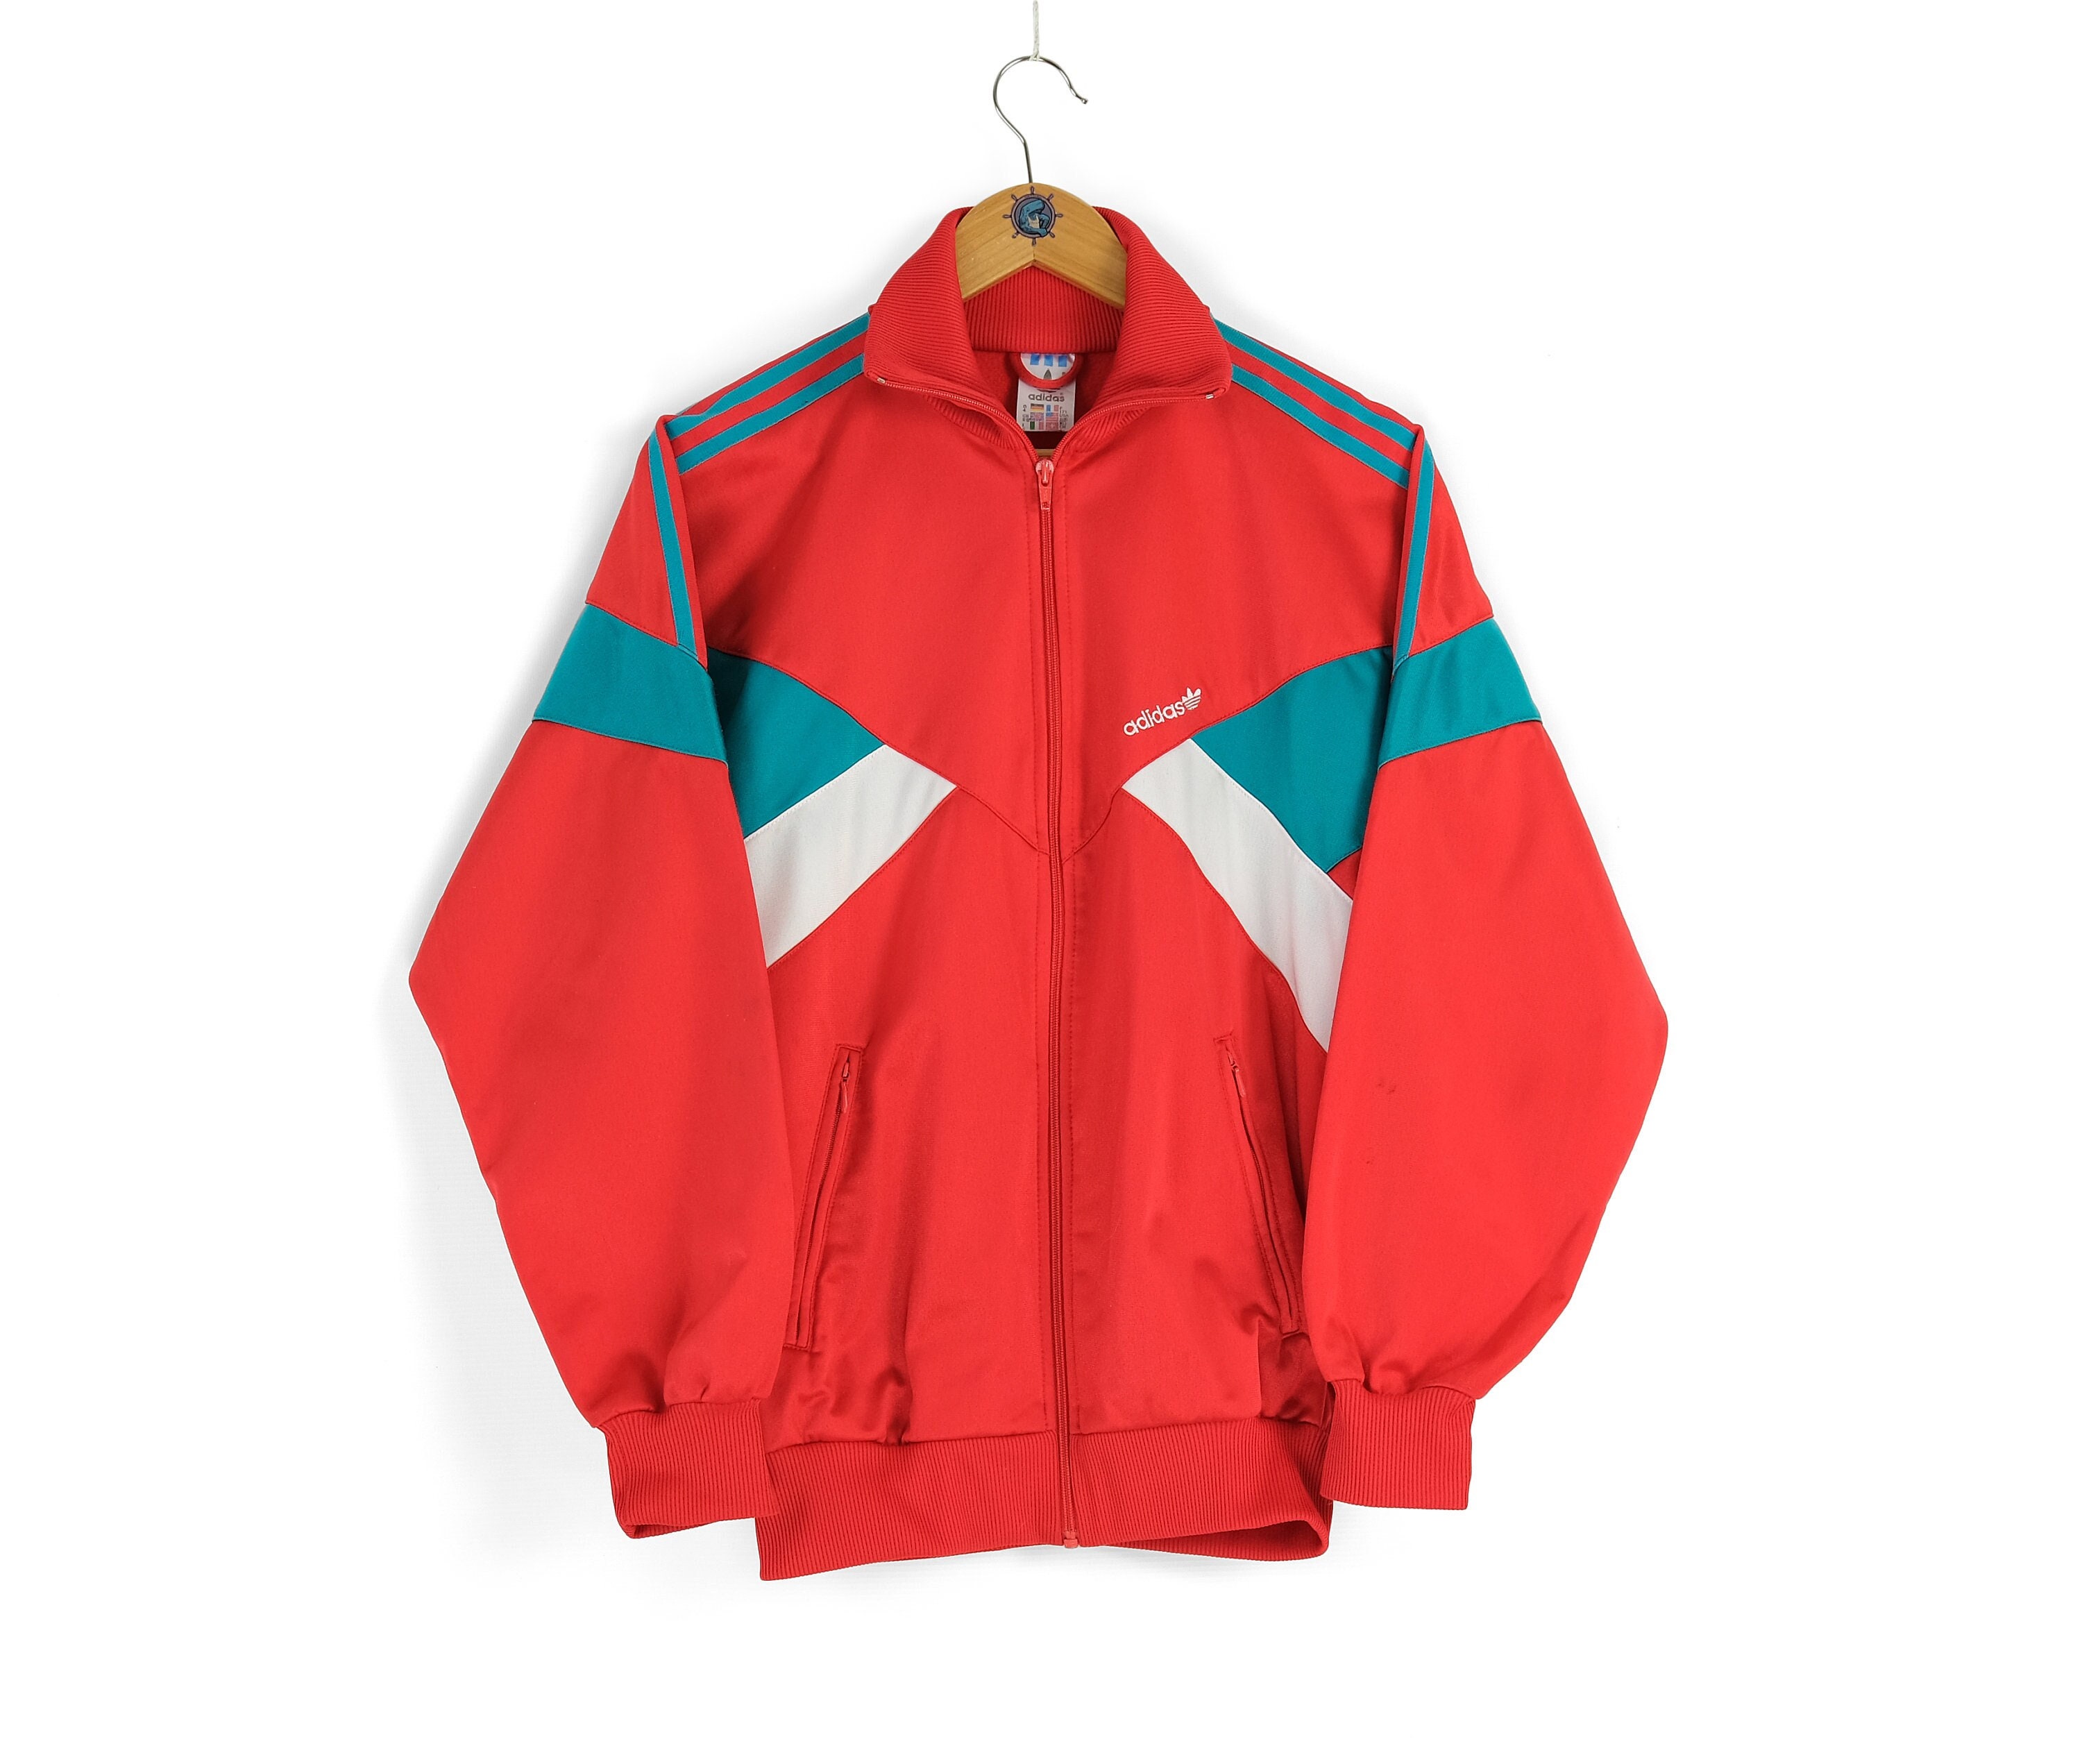 Vintage Football Jackets, Tops and Hoodies For Sale – Casual